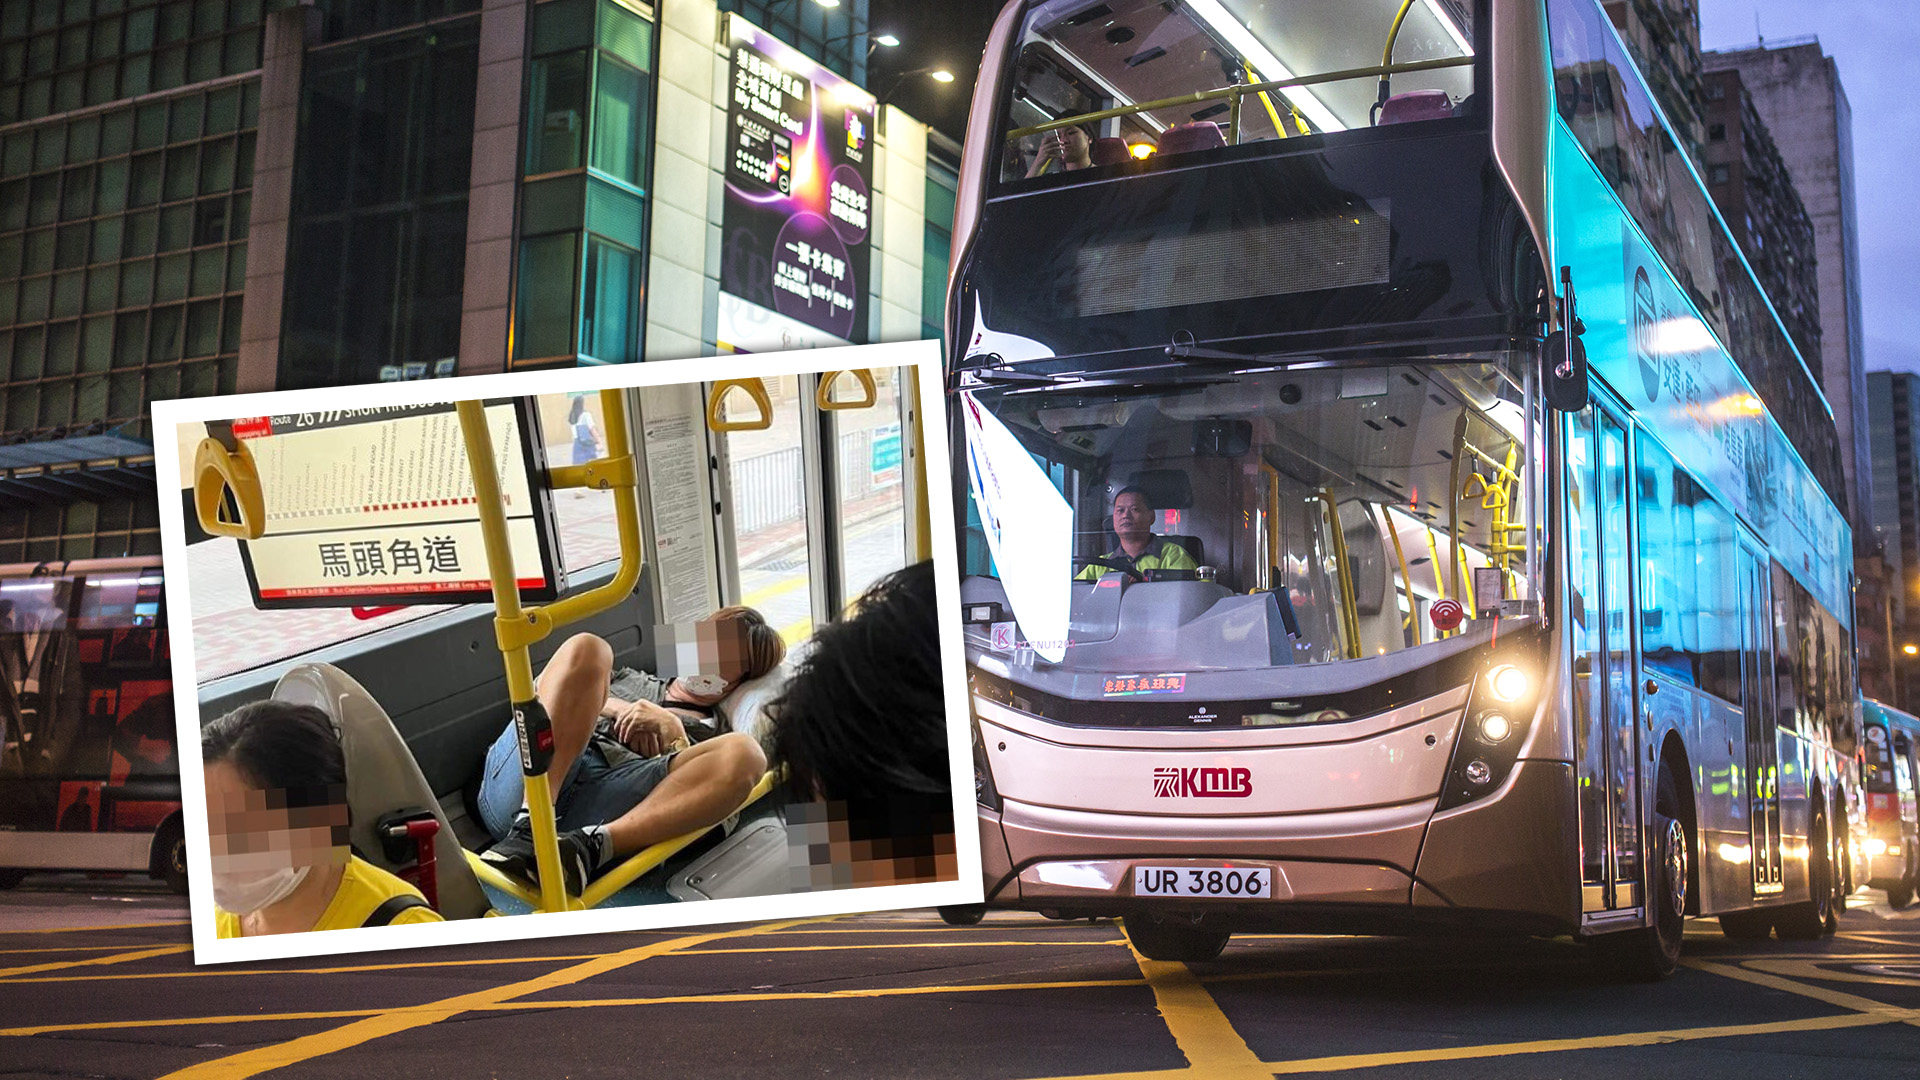 Hong Kong social media has been abuzz about a photo of a passenger asleep on the luggage rack of a double-decker bus in the city. Photo: SCMP composite/Facebook/@HKroad